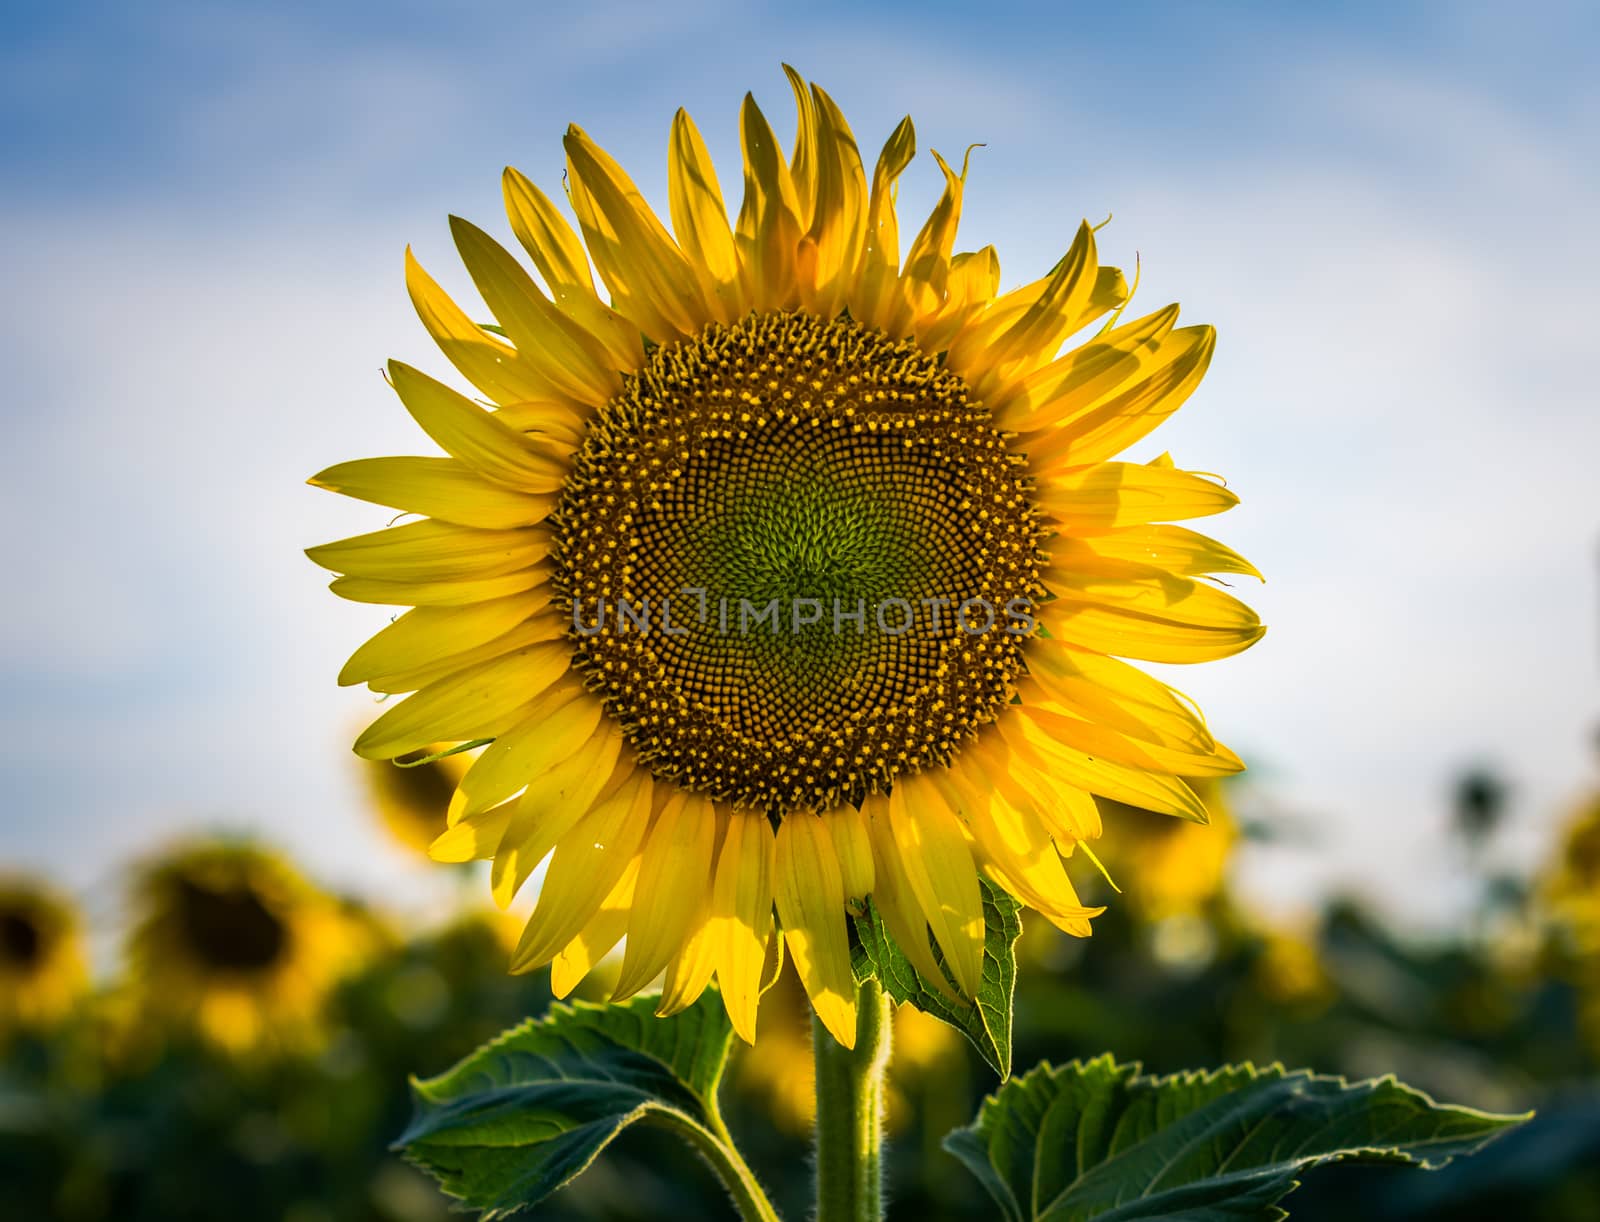 bright yellow sunflower with two green leaves on a field against a blue sky background